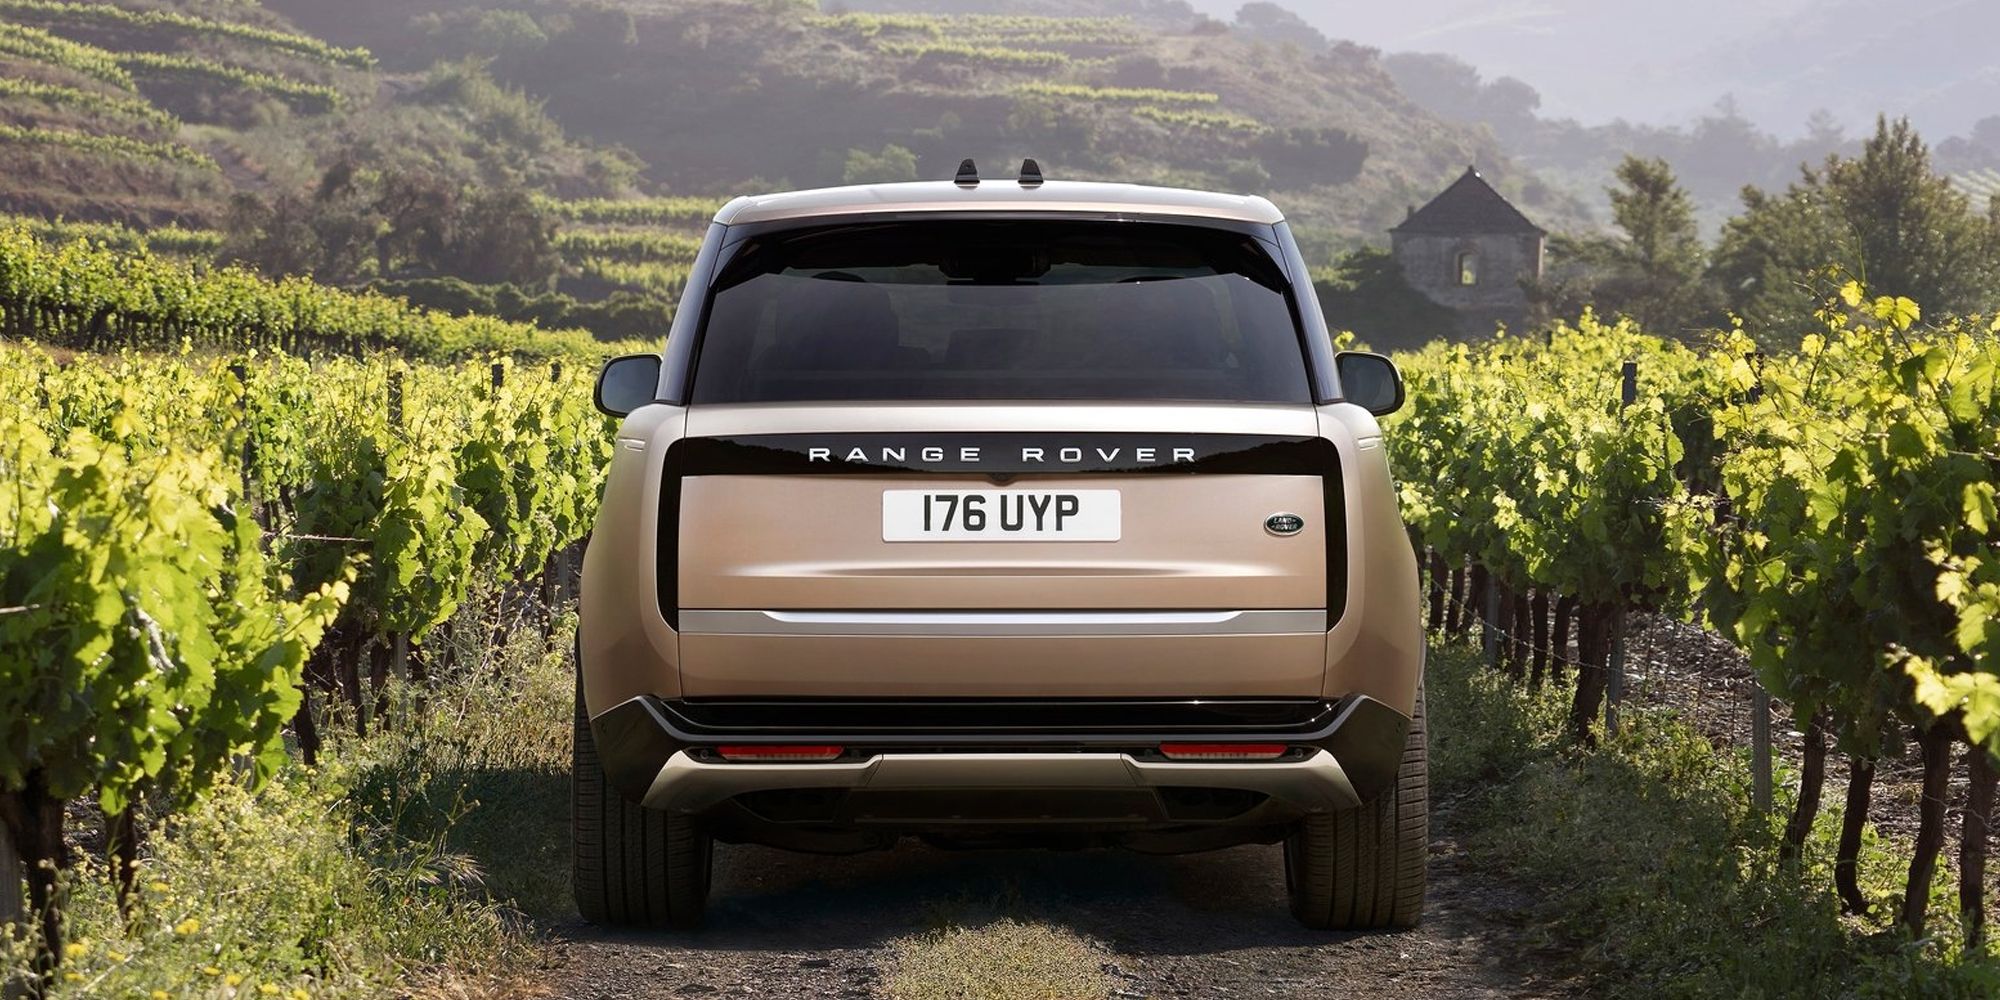 The rear end of the new Range Rover in a vineyard